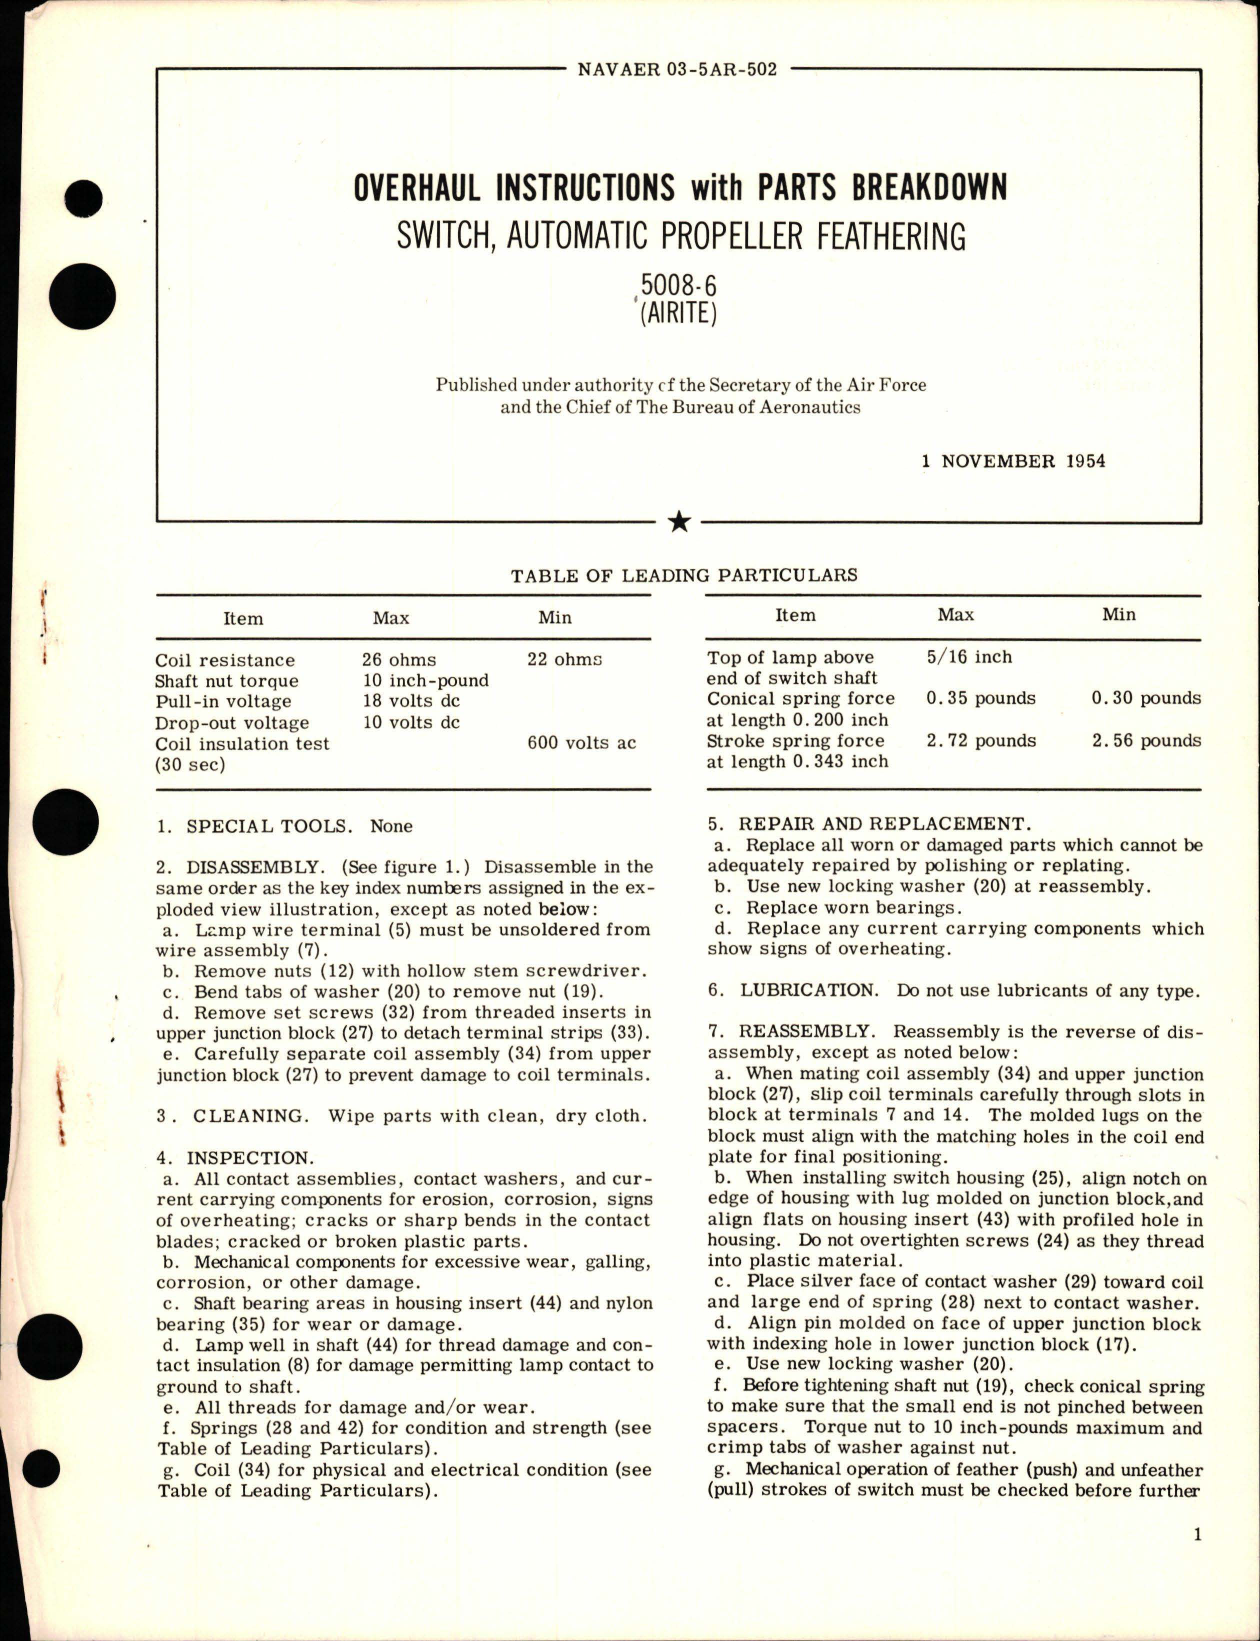 Sample page 1 from AirCorps Library document: Overhaul Instructions with Parts Breakdown for Automatic Propeller Feathering Switch - 5008-6